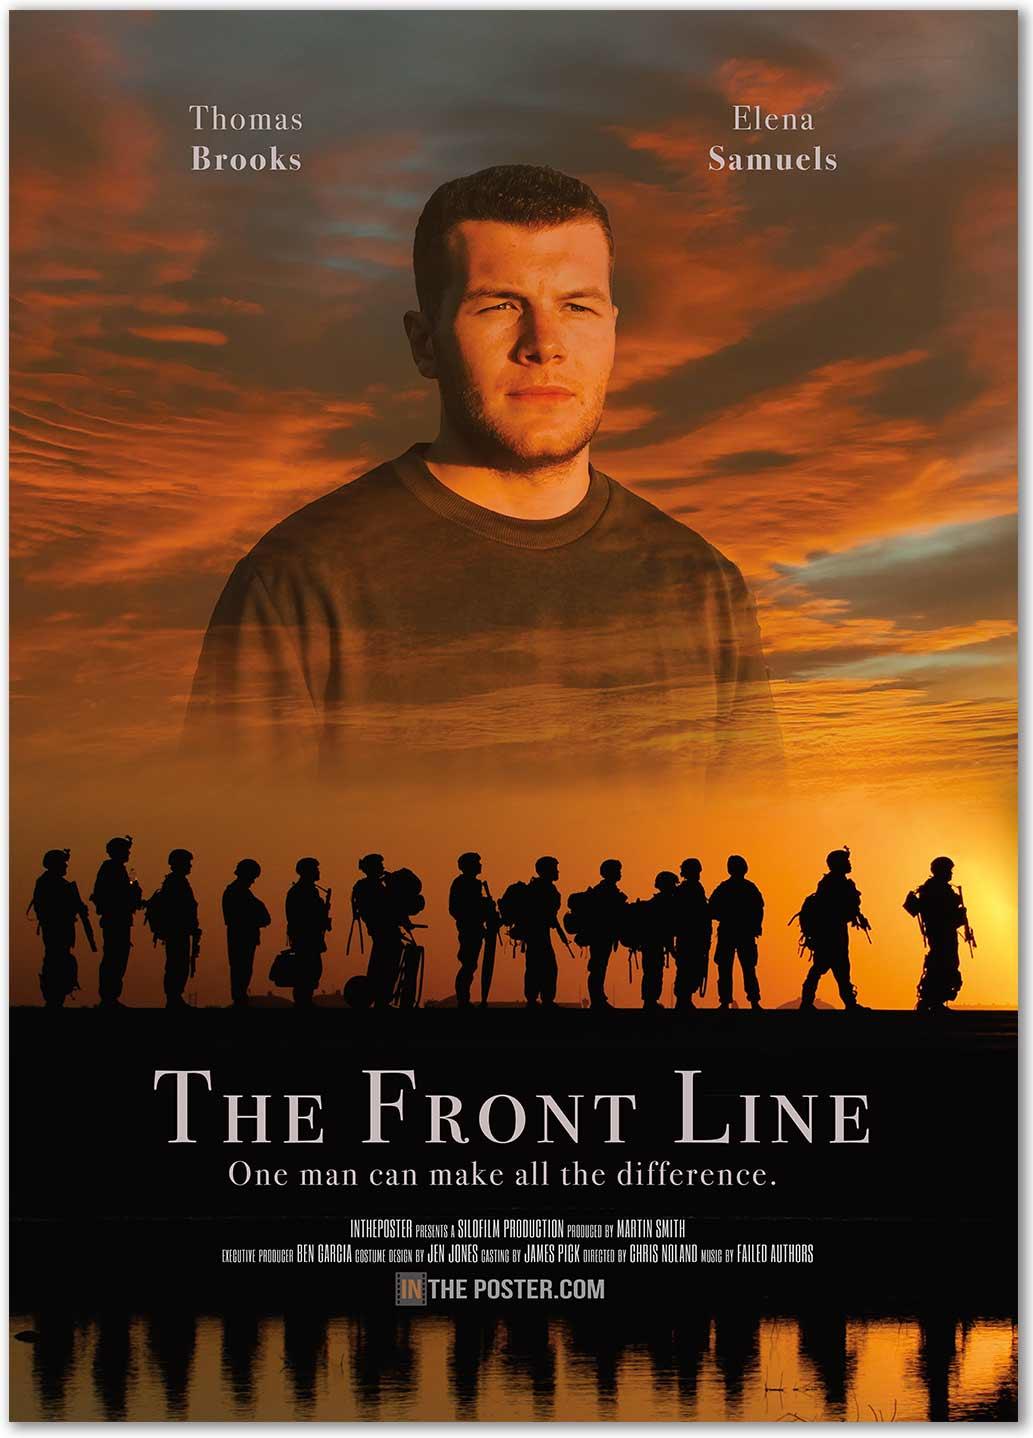 A war movie poster with silhouettes of soldiers with an orange sky and a hero looking into the distance